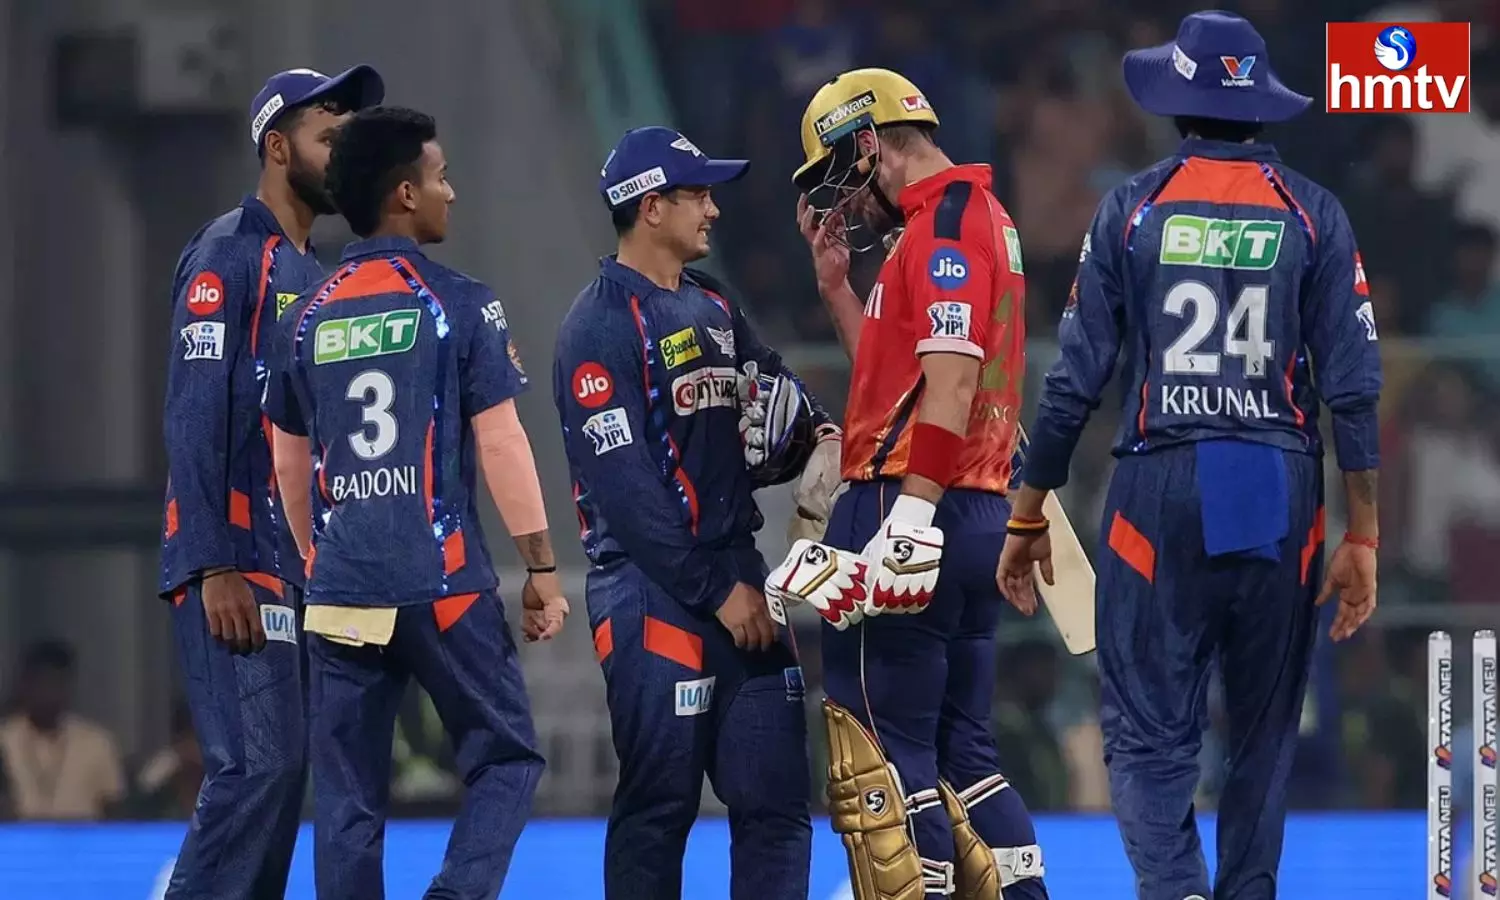 Lucknow Super Giants Wins With 21 Runs Against Punjab Kings